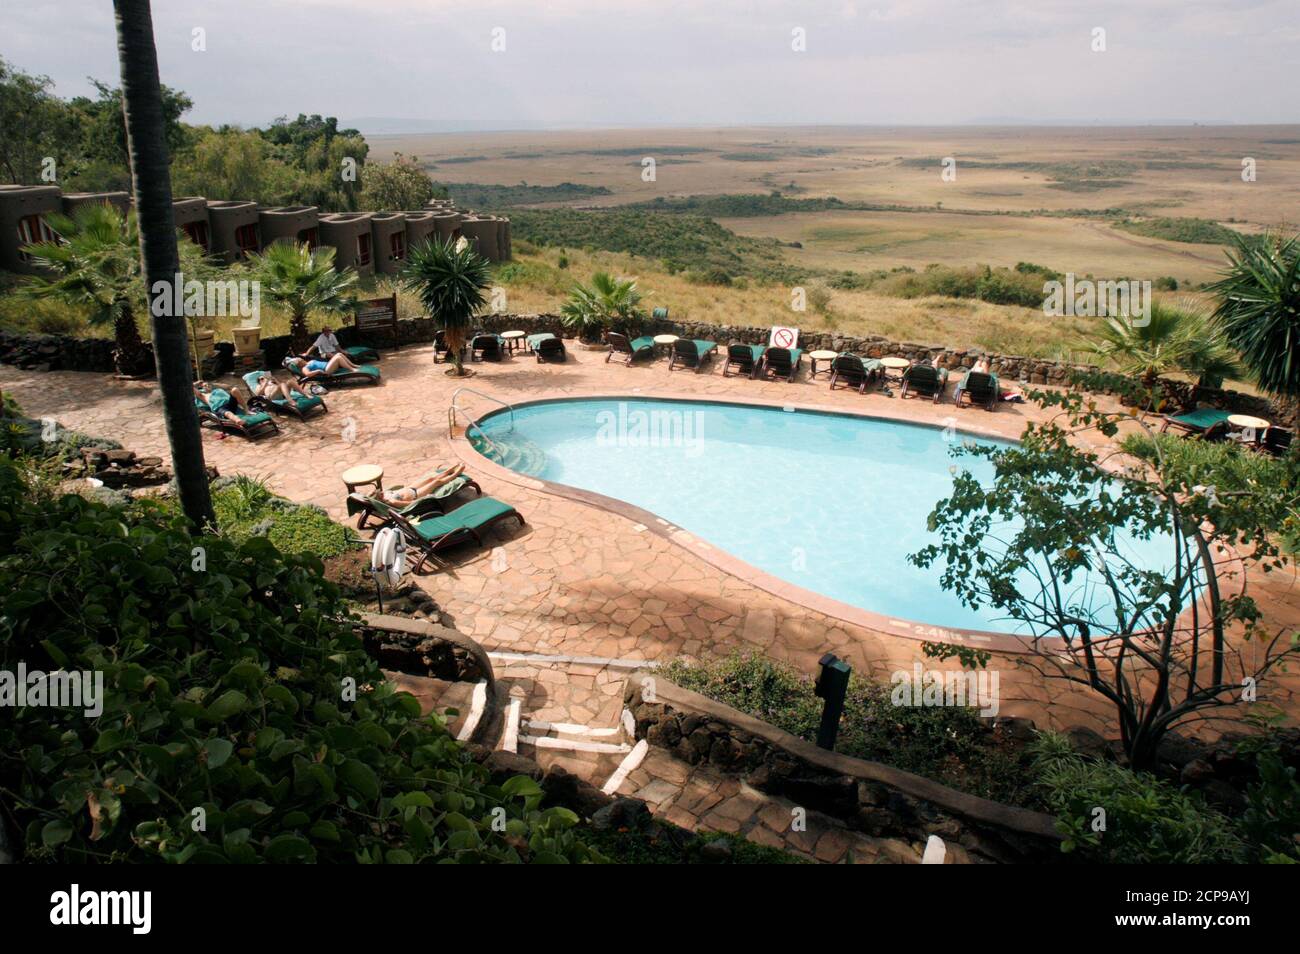 Tourists are seen by the poolside of the Mara Serena Safari Lodge, within the Masai Mara game reserve, southwest of Nairobi, Kenya, July 28, 2009. Picture taken July 28, 2009. REUTERS/Thomas Mukoya     TPX IMAGES OF THE DAY Stock Photo